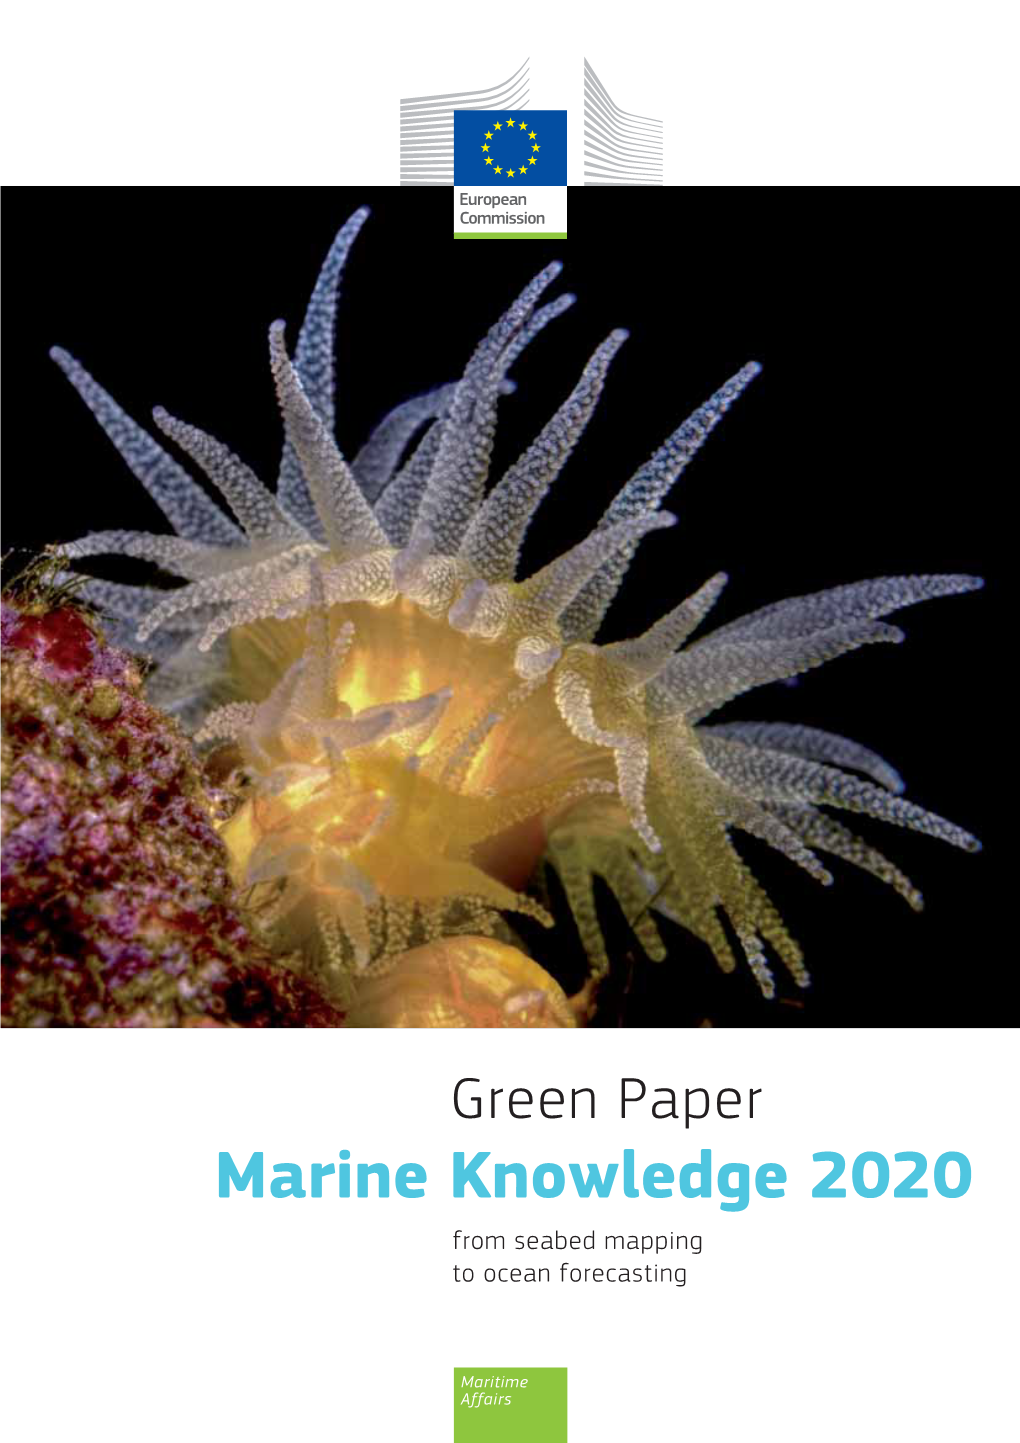 Green Paper Marine Knowledge 2020 from Seabed Mapping to Ocean Forecasting